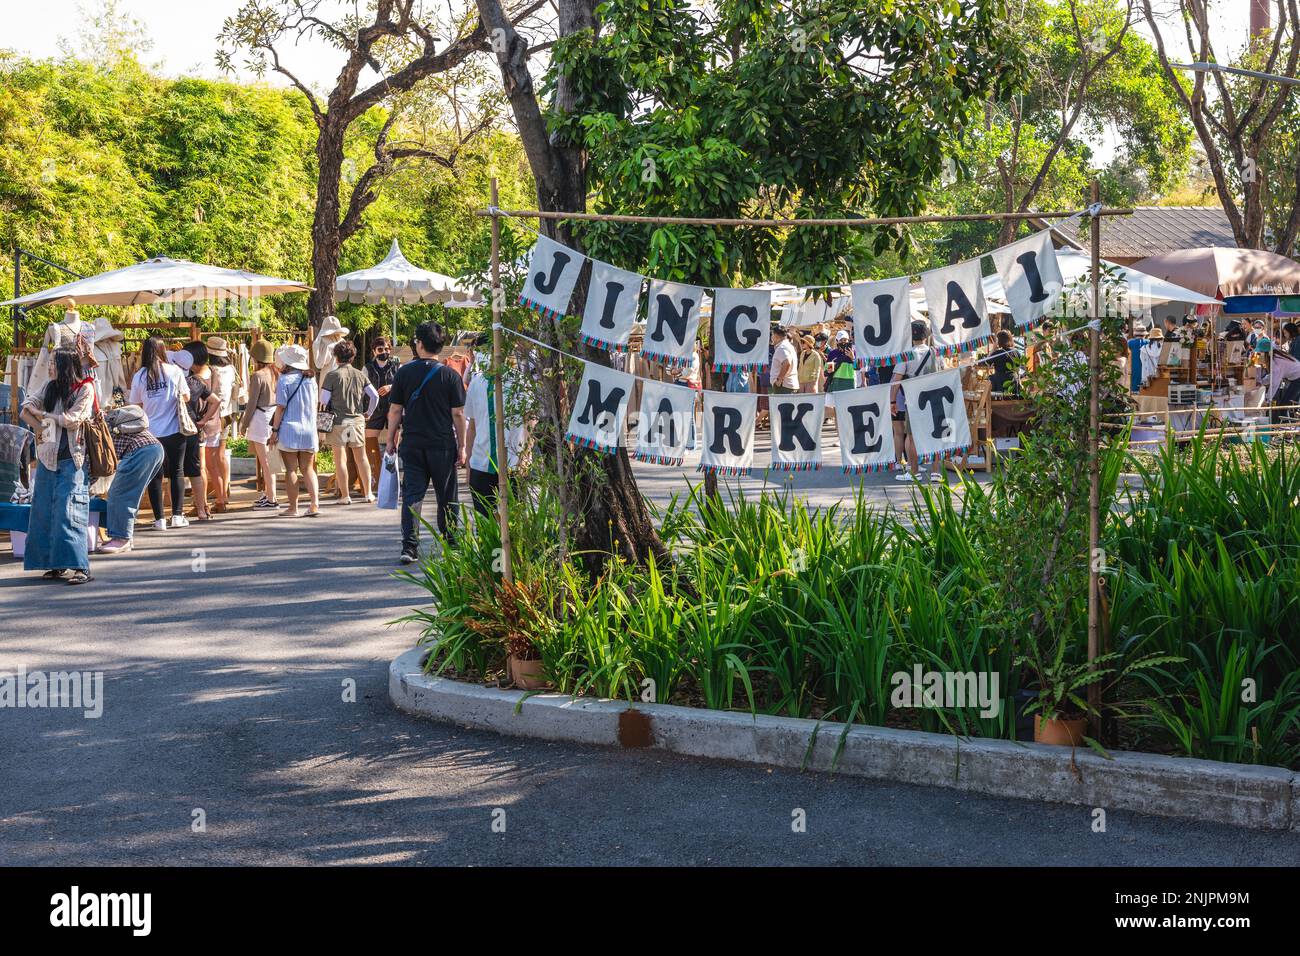 February 11, 2023: Jing Jai market, a lively weekend market supplying organic fruit and vegetable, coffee and food, located in chiang mai, thailand. I Stock Photo